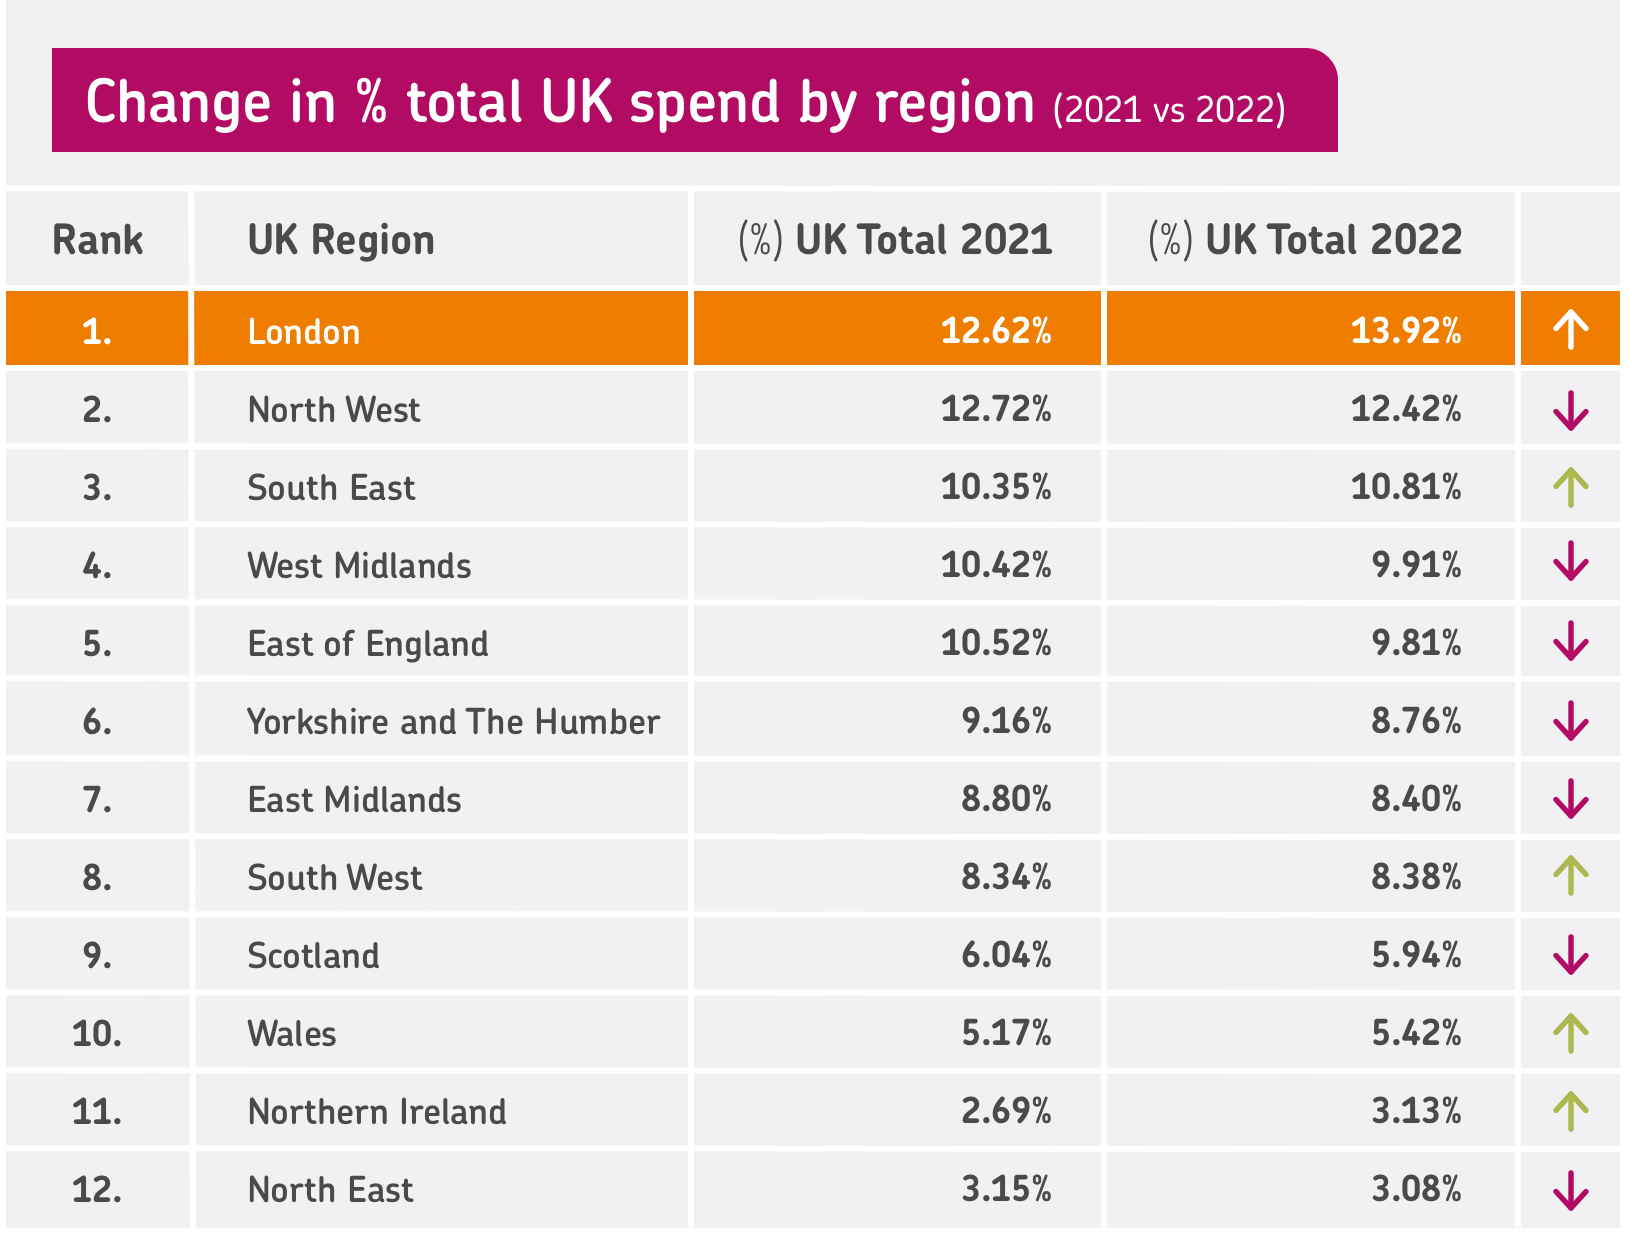 Table showing how share of UK spending changed between 2021 and 2022 for each region, with London highlighted at the top